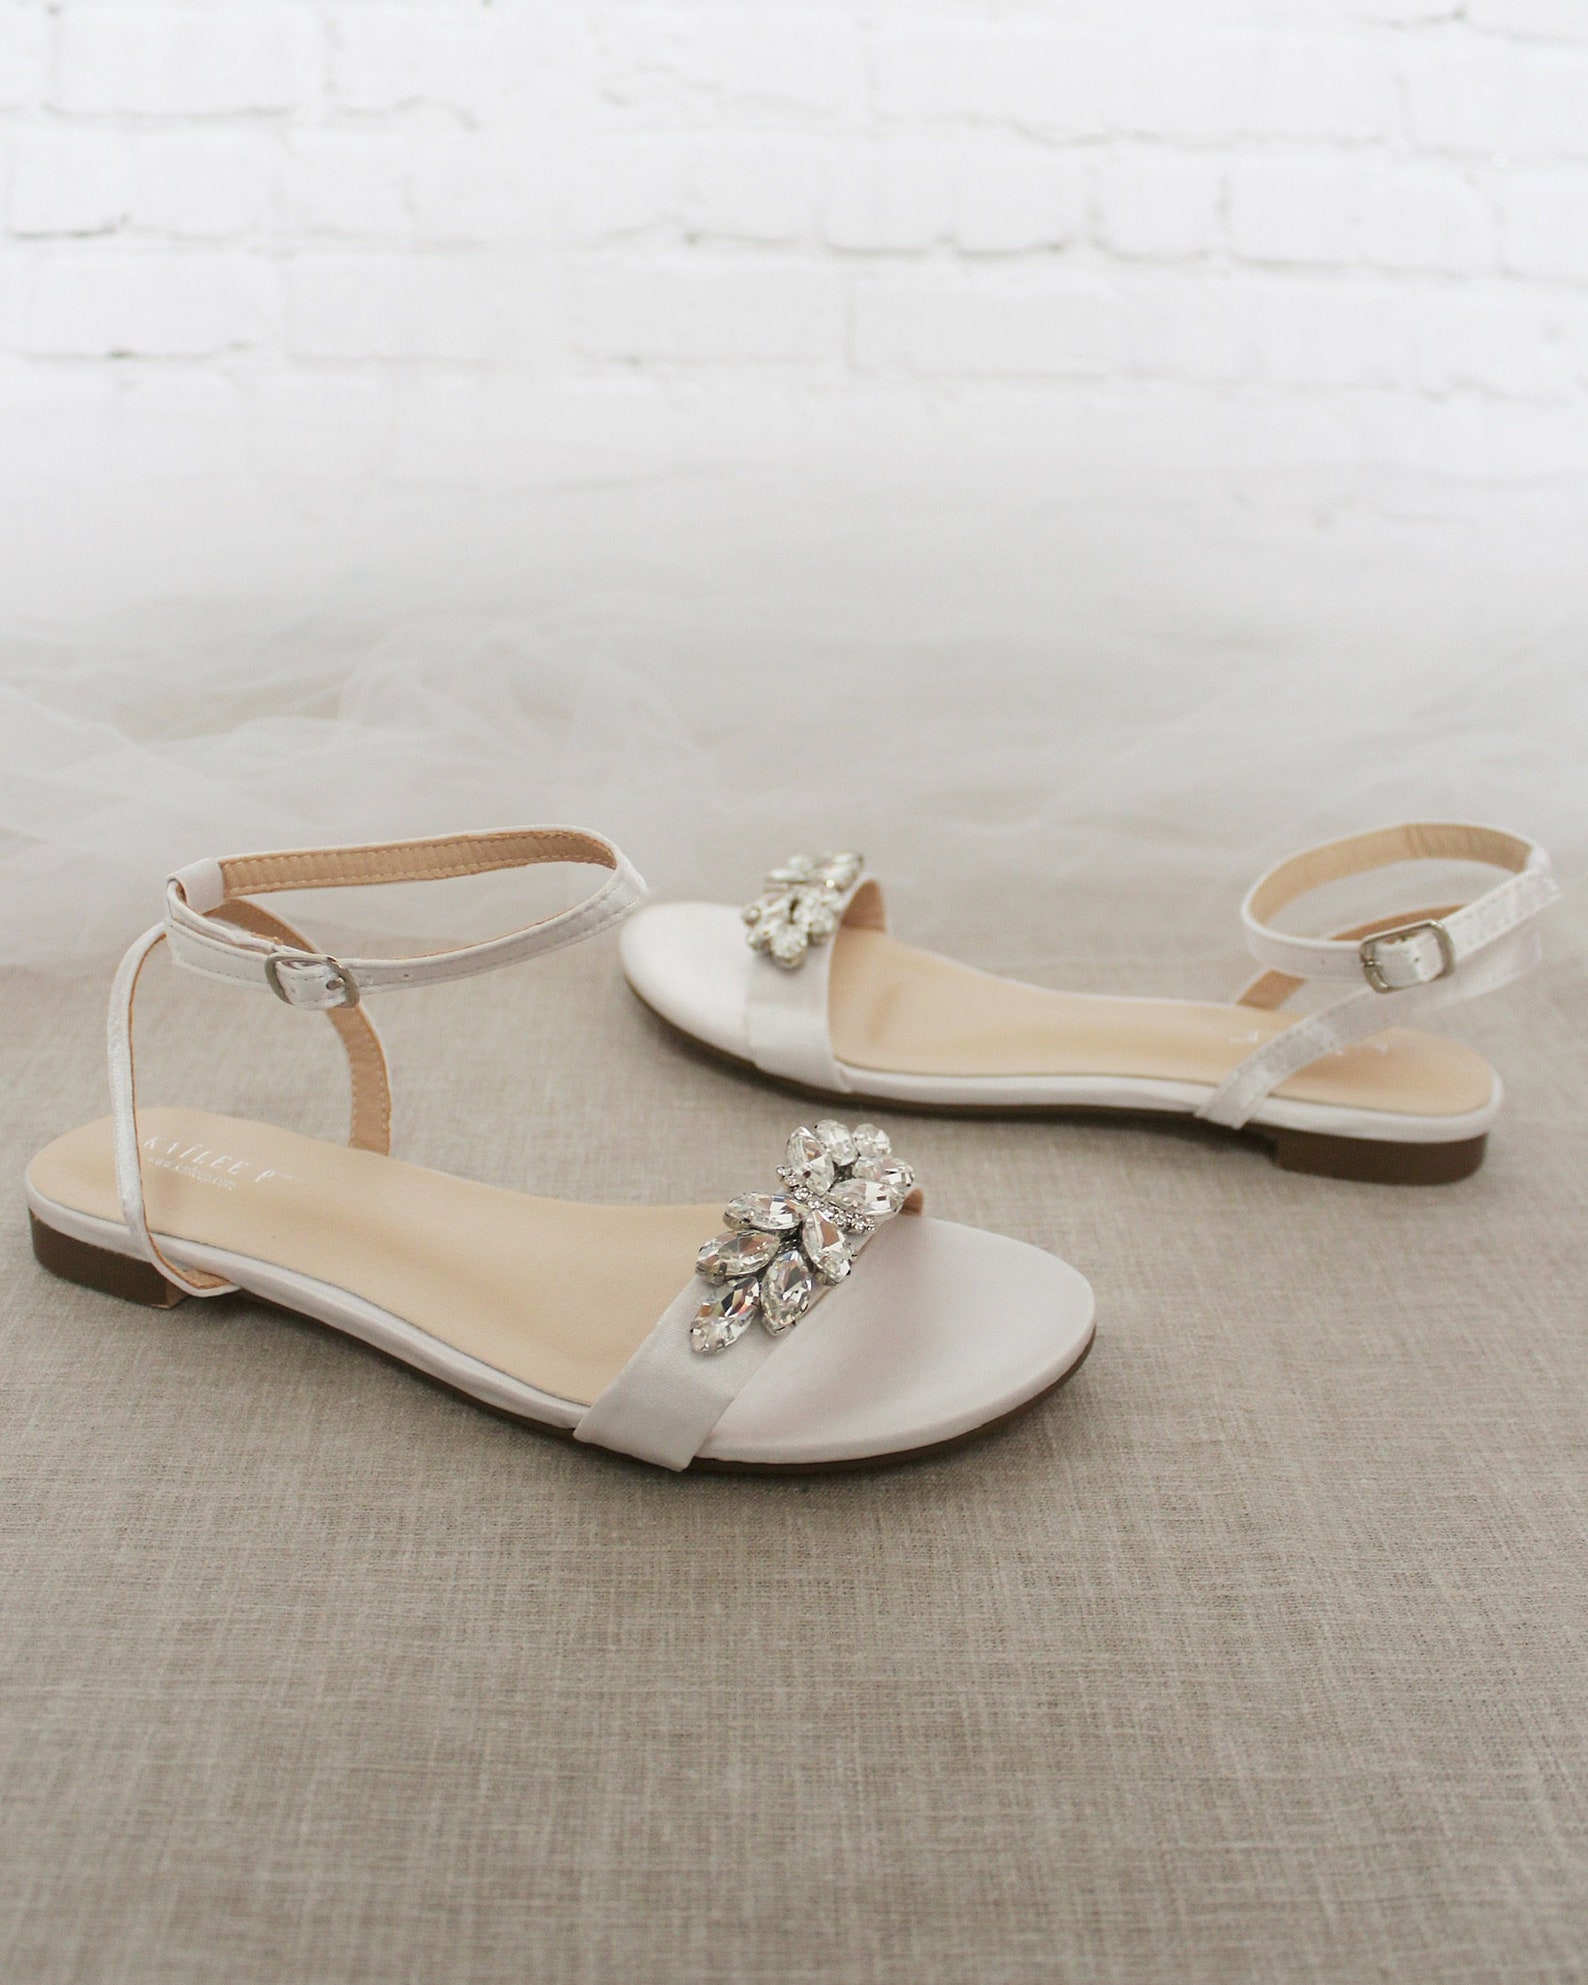 White Satin Flat Sandal With BUTTERFLY BROOCH Bridesmaid - Etsy